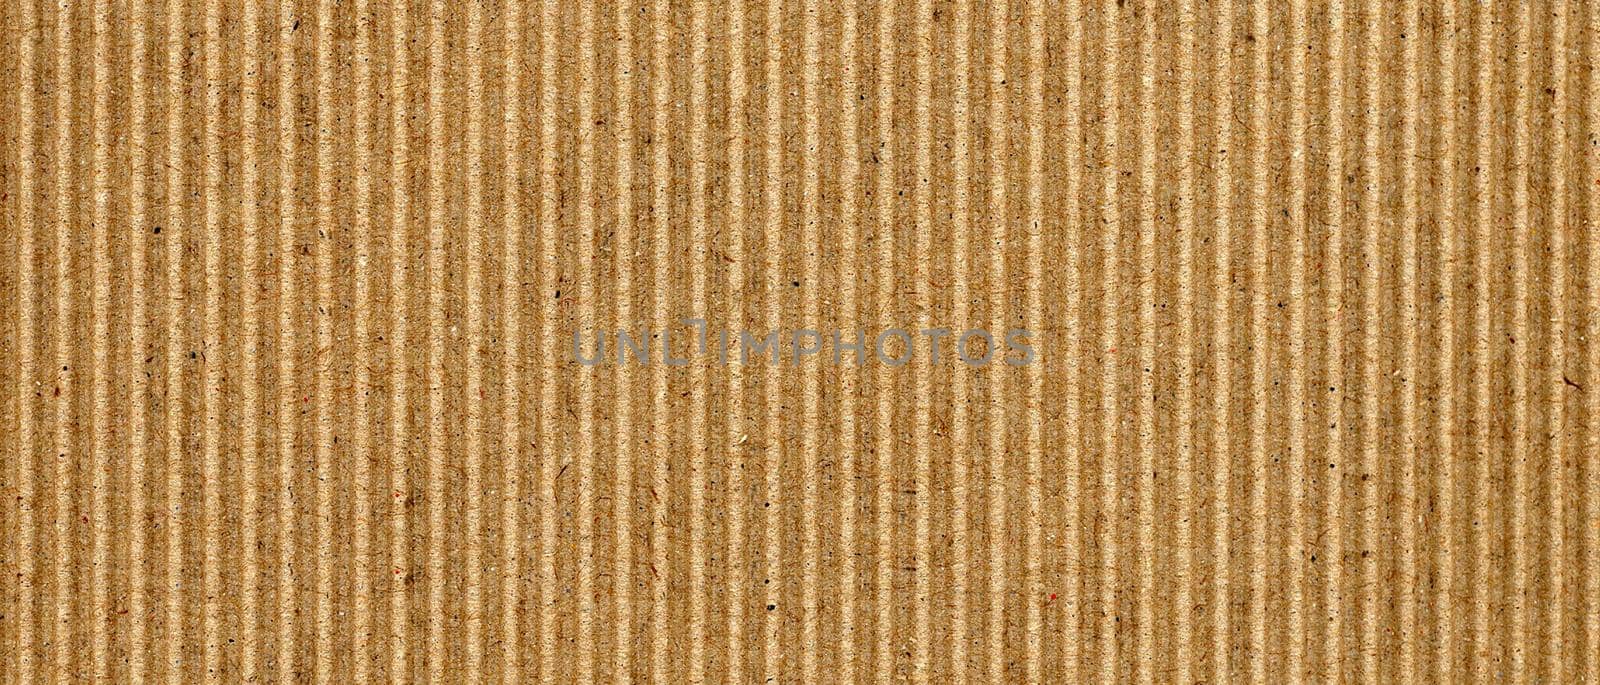 wide brown corrugated cardboard texture background by claudiodivizia